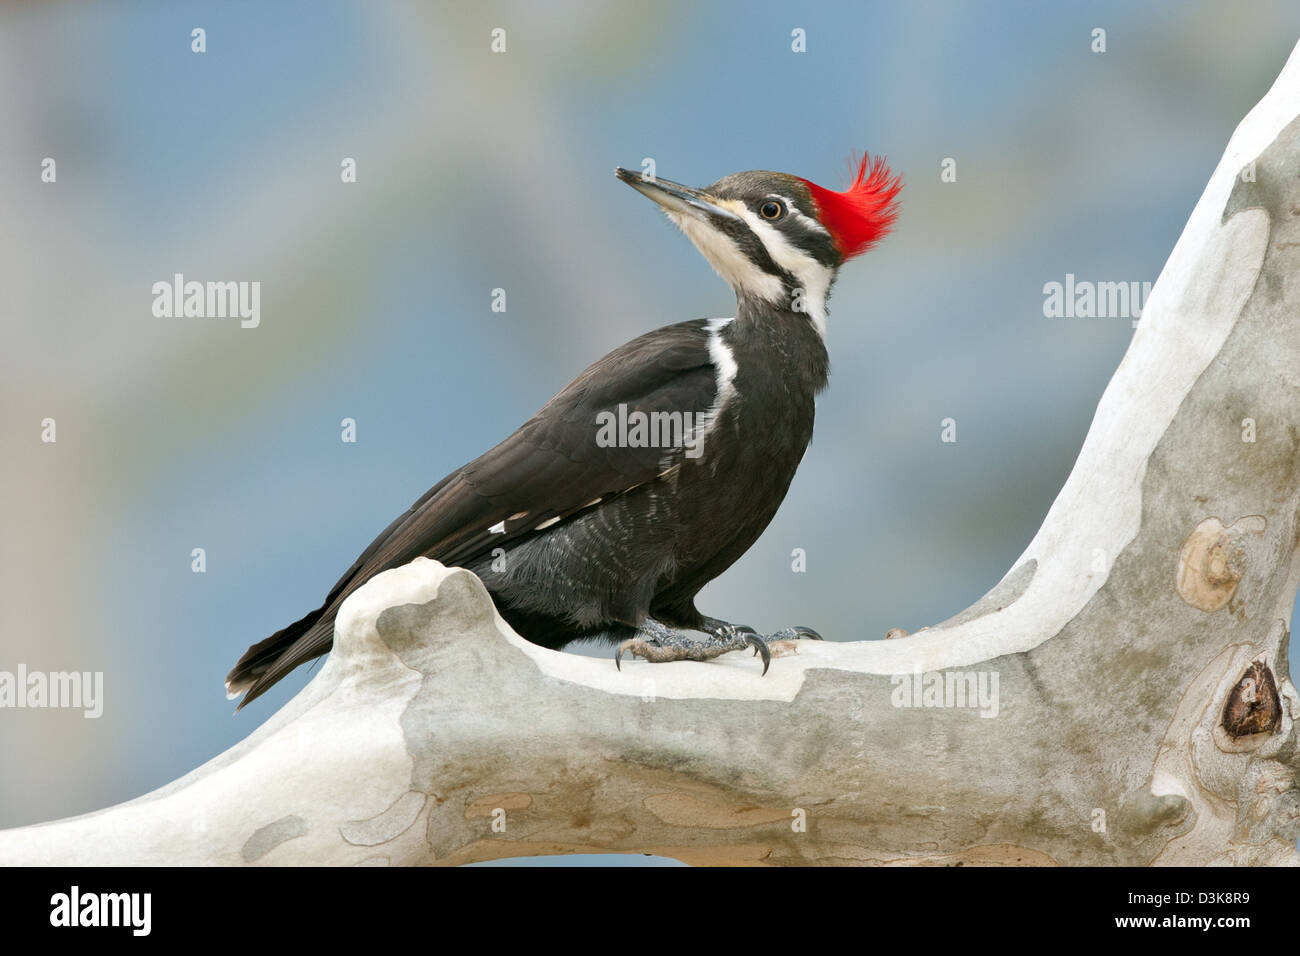 Female Pileated Woodpecker on Sycamore Tree bird birds woodpeckers Ornithology Science Nature Wildlife Environment Stock Photo